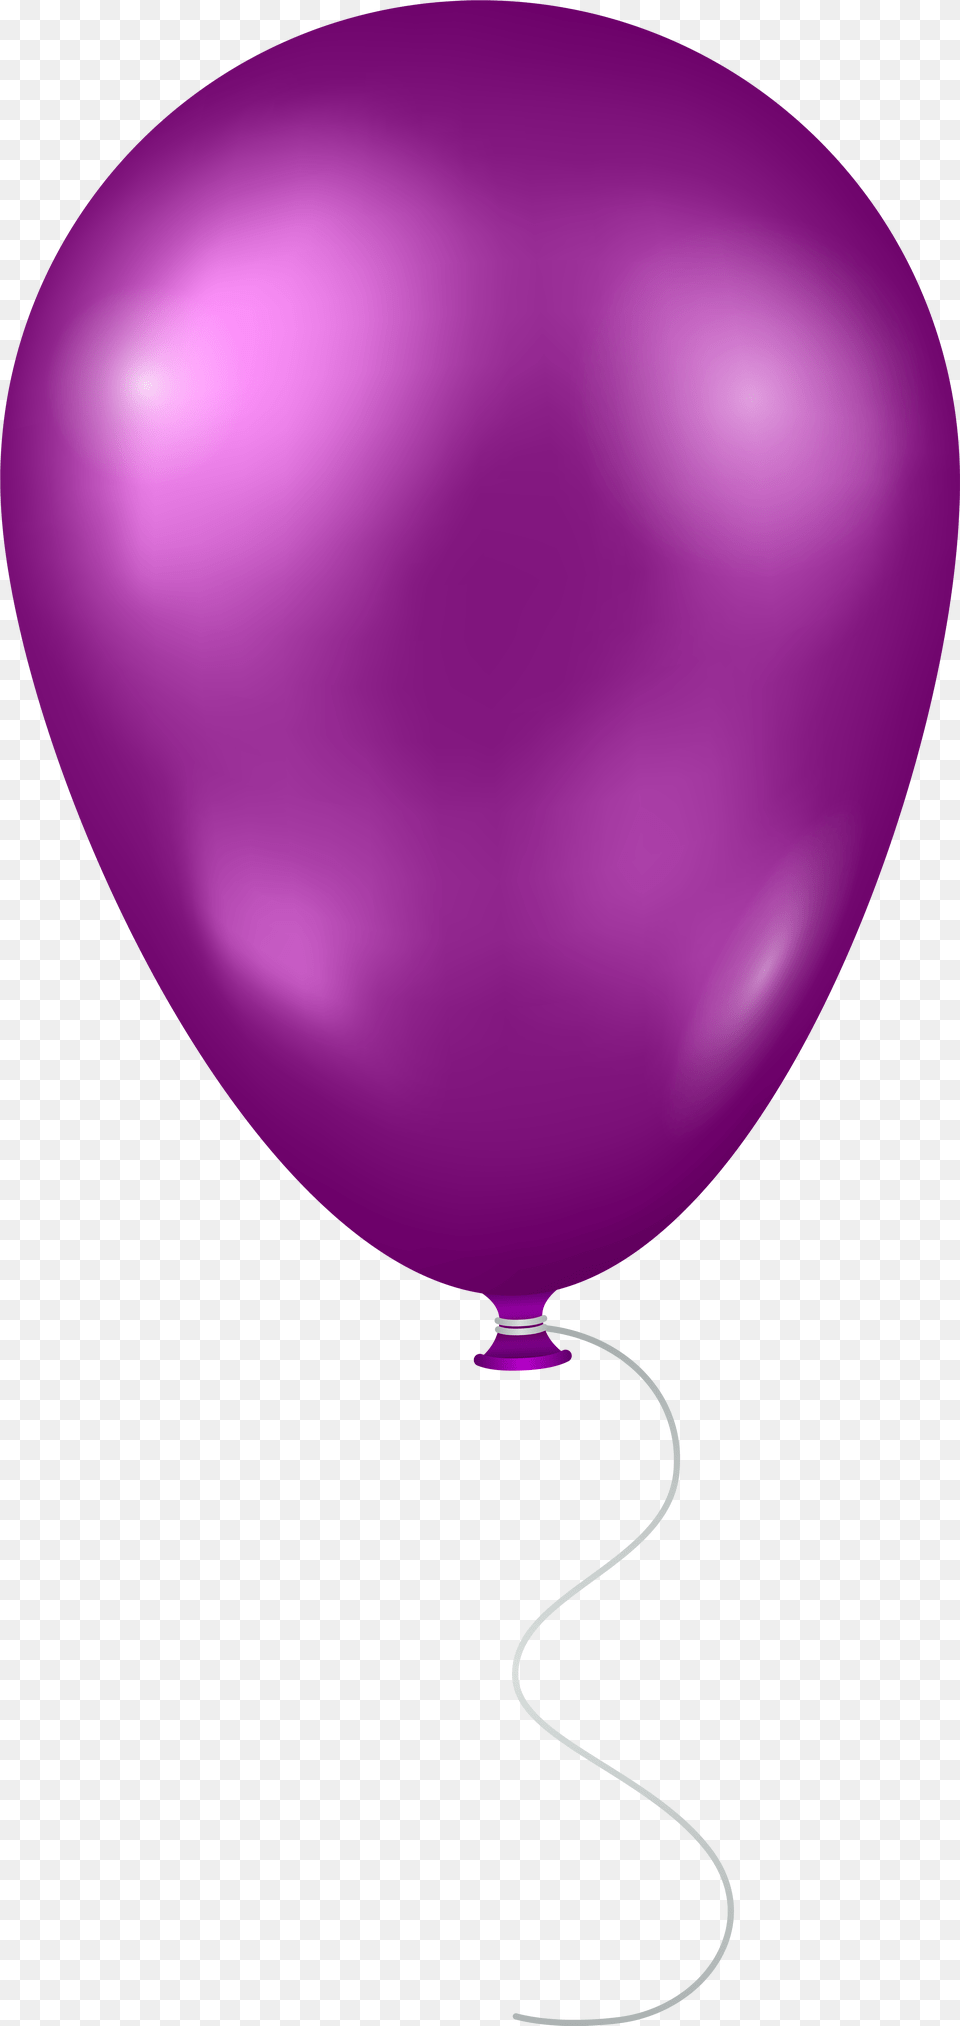 Pink Birthday Purple Balloons Art Images Clip Art Balloon Image With Transparent Background Free Png Download